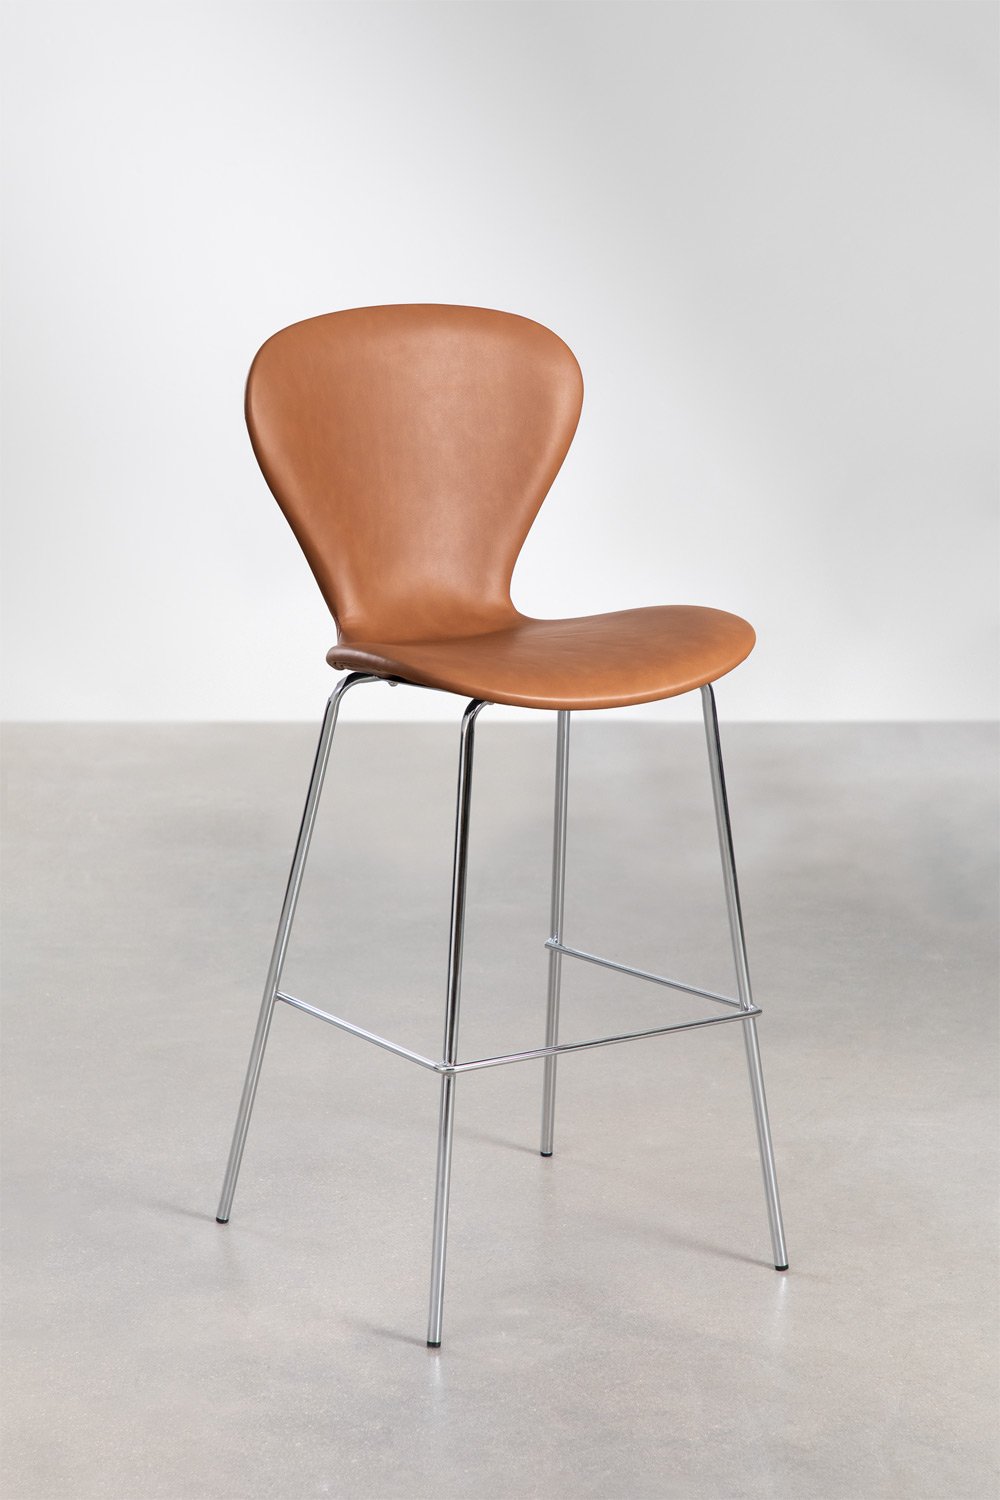 High Stool in Leatherette Uit, gallery image 1